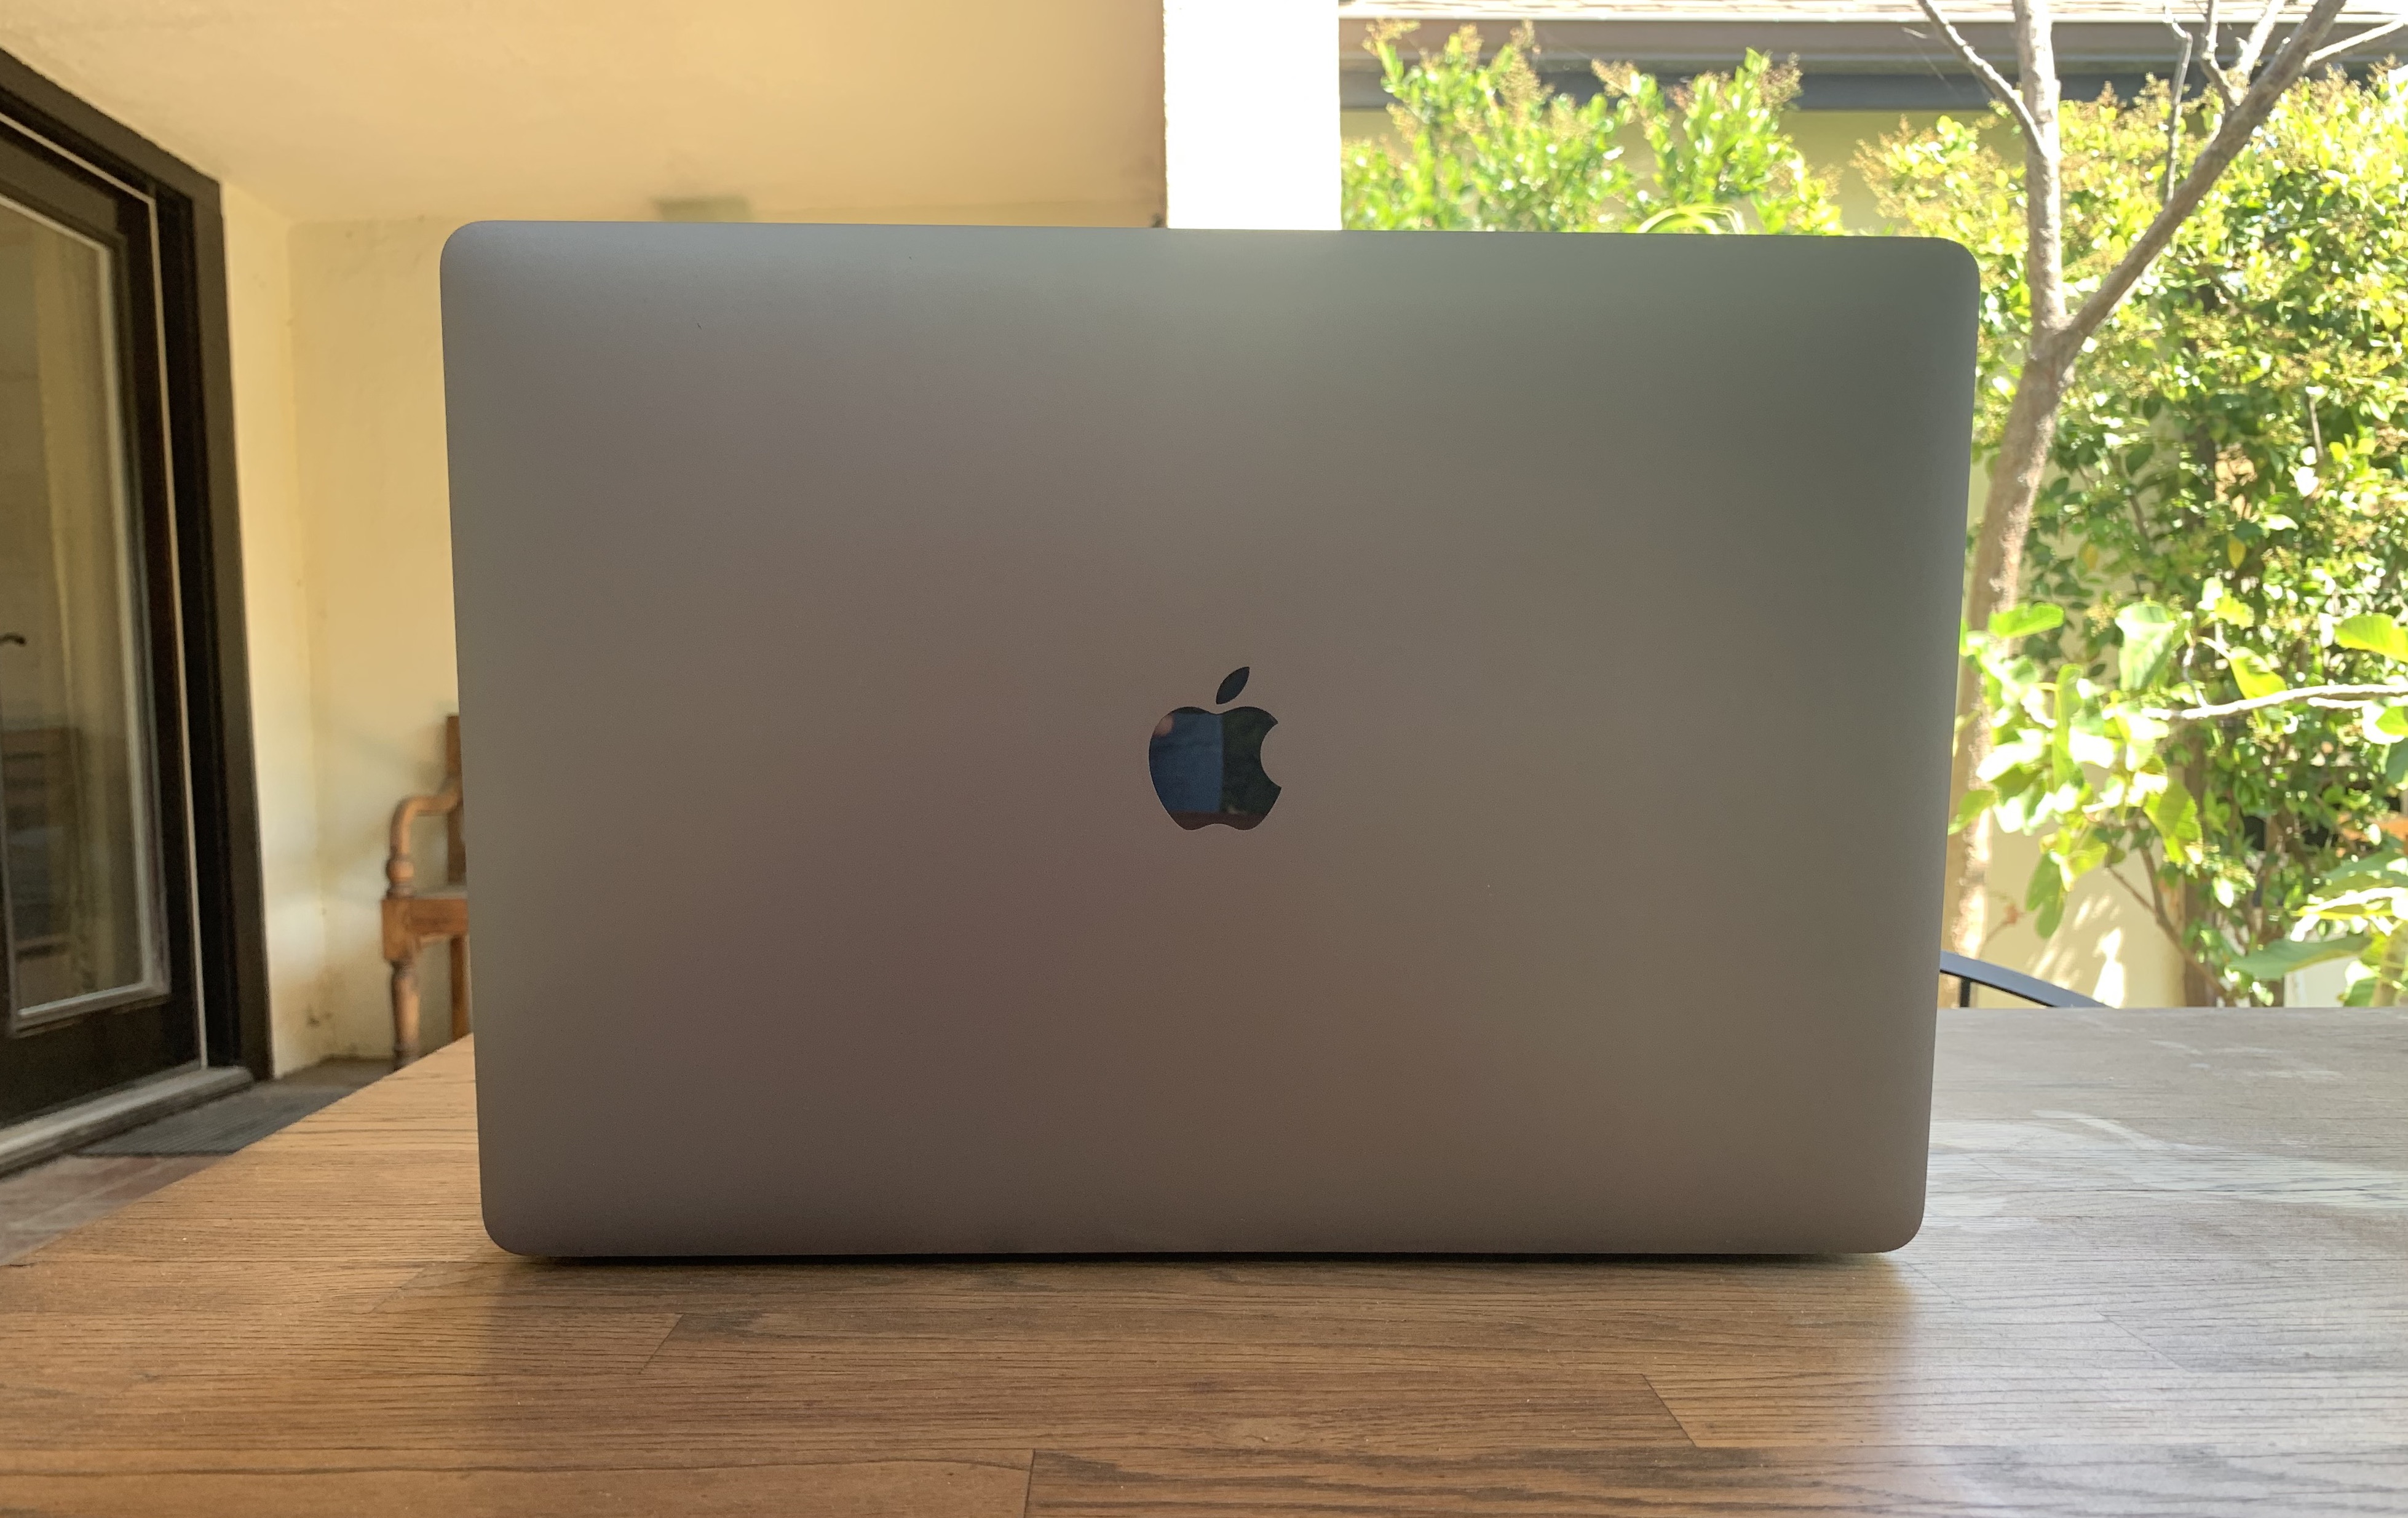 inch MacBook Pro mini review: How much does Apple's fastest